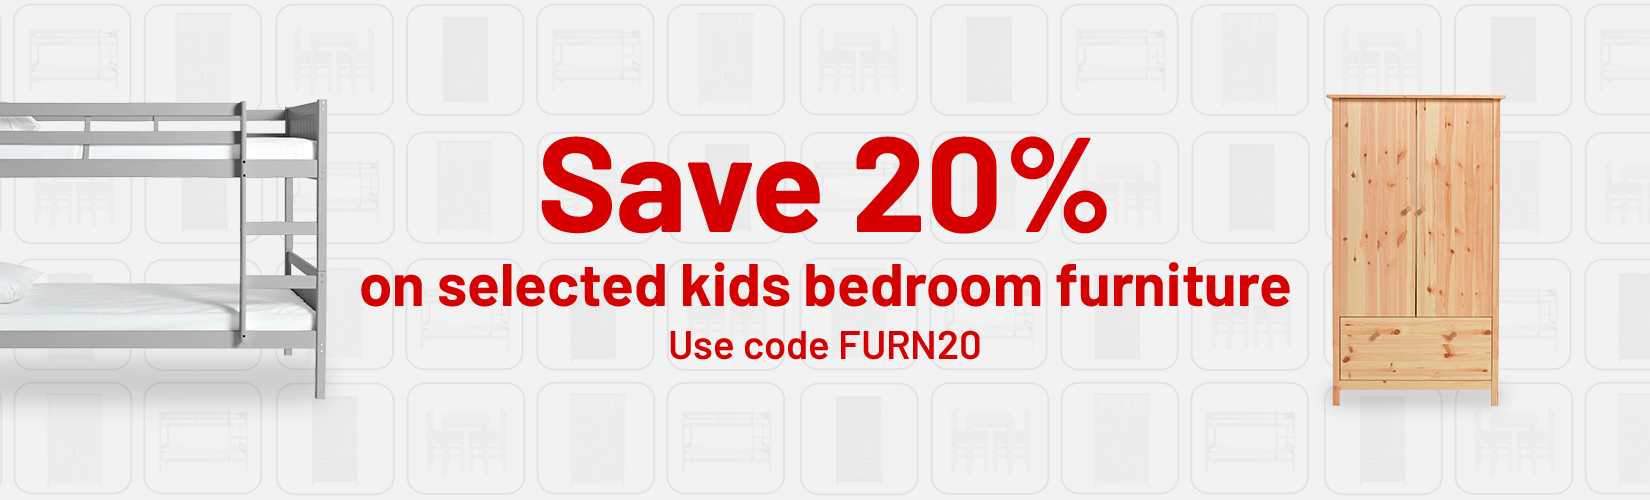 Save 20% on selected kids bedroom furniture with code FURN20.